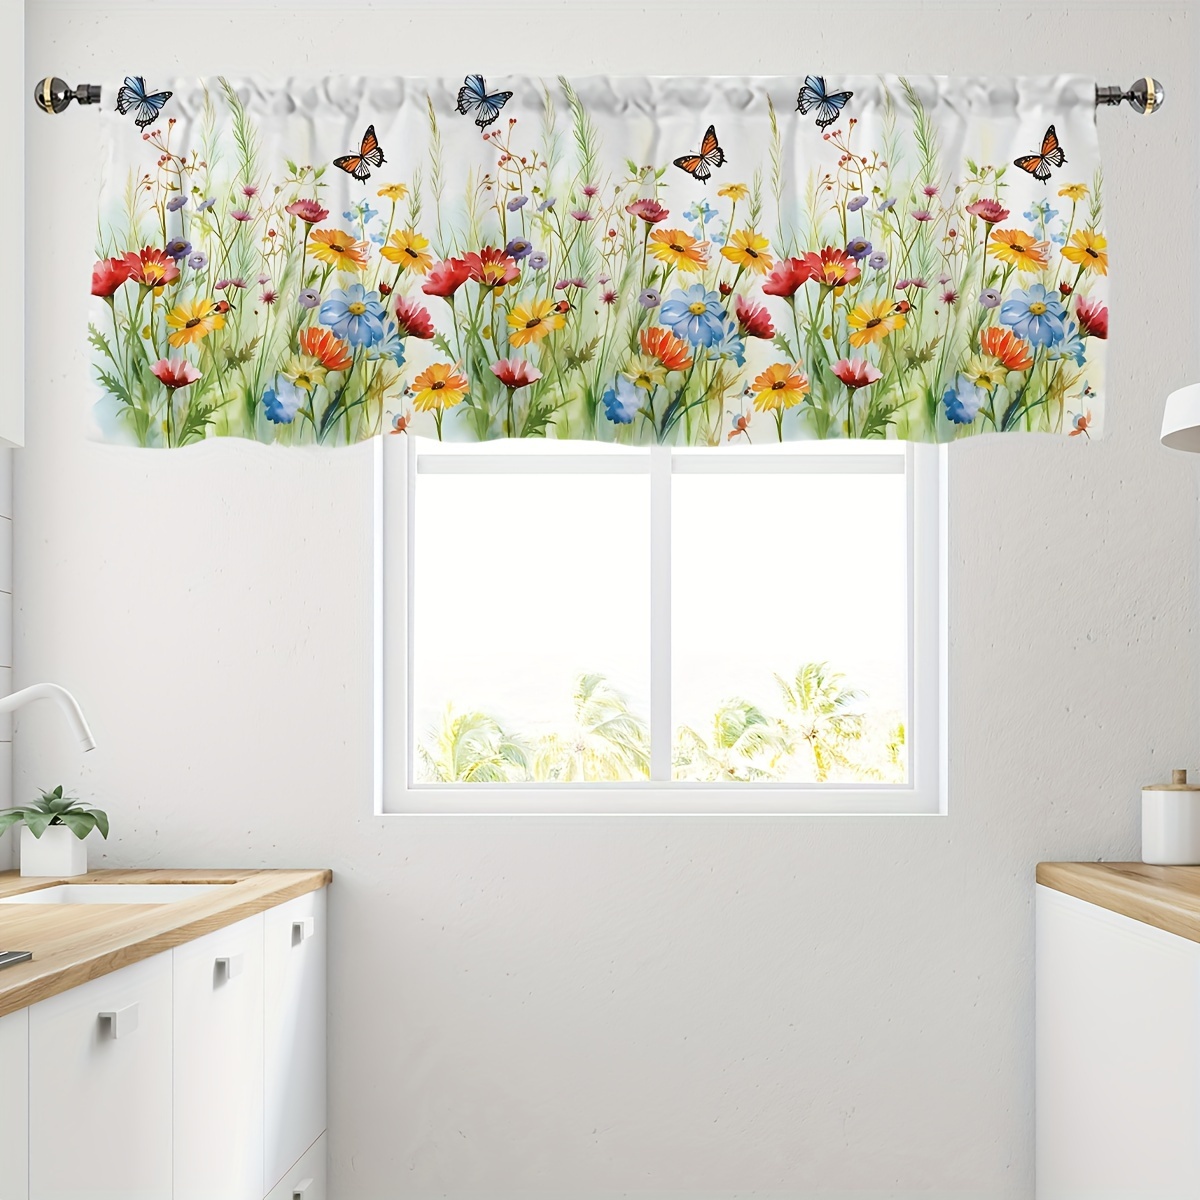 

1pc Classic Semi-sheer Valance With Colorful Floral & Butterfly Print - Polyester, Woven, Rod Pocket Hanging, , Hand Wash - Versatile Window Treatment For Kitchen, Living Room, Bedroom